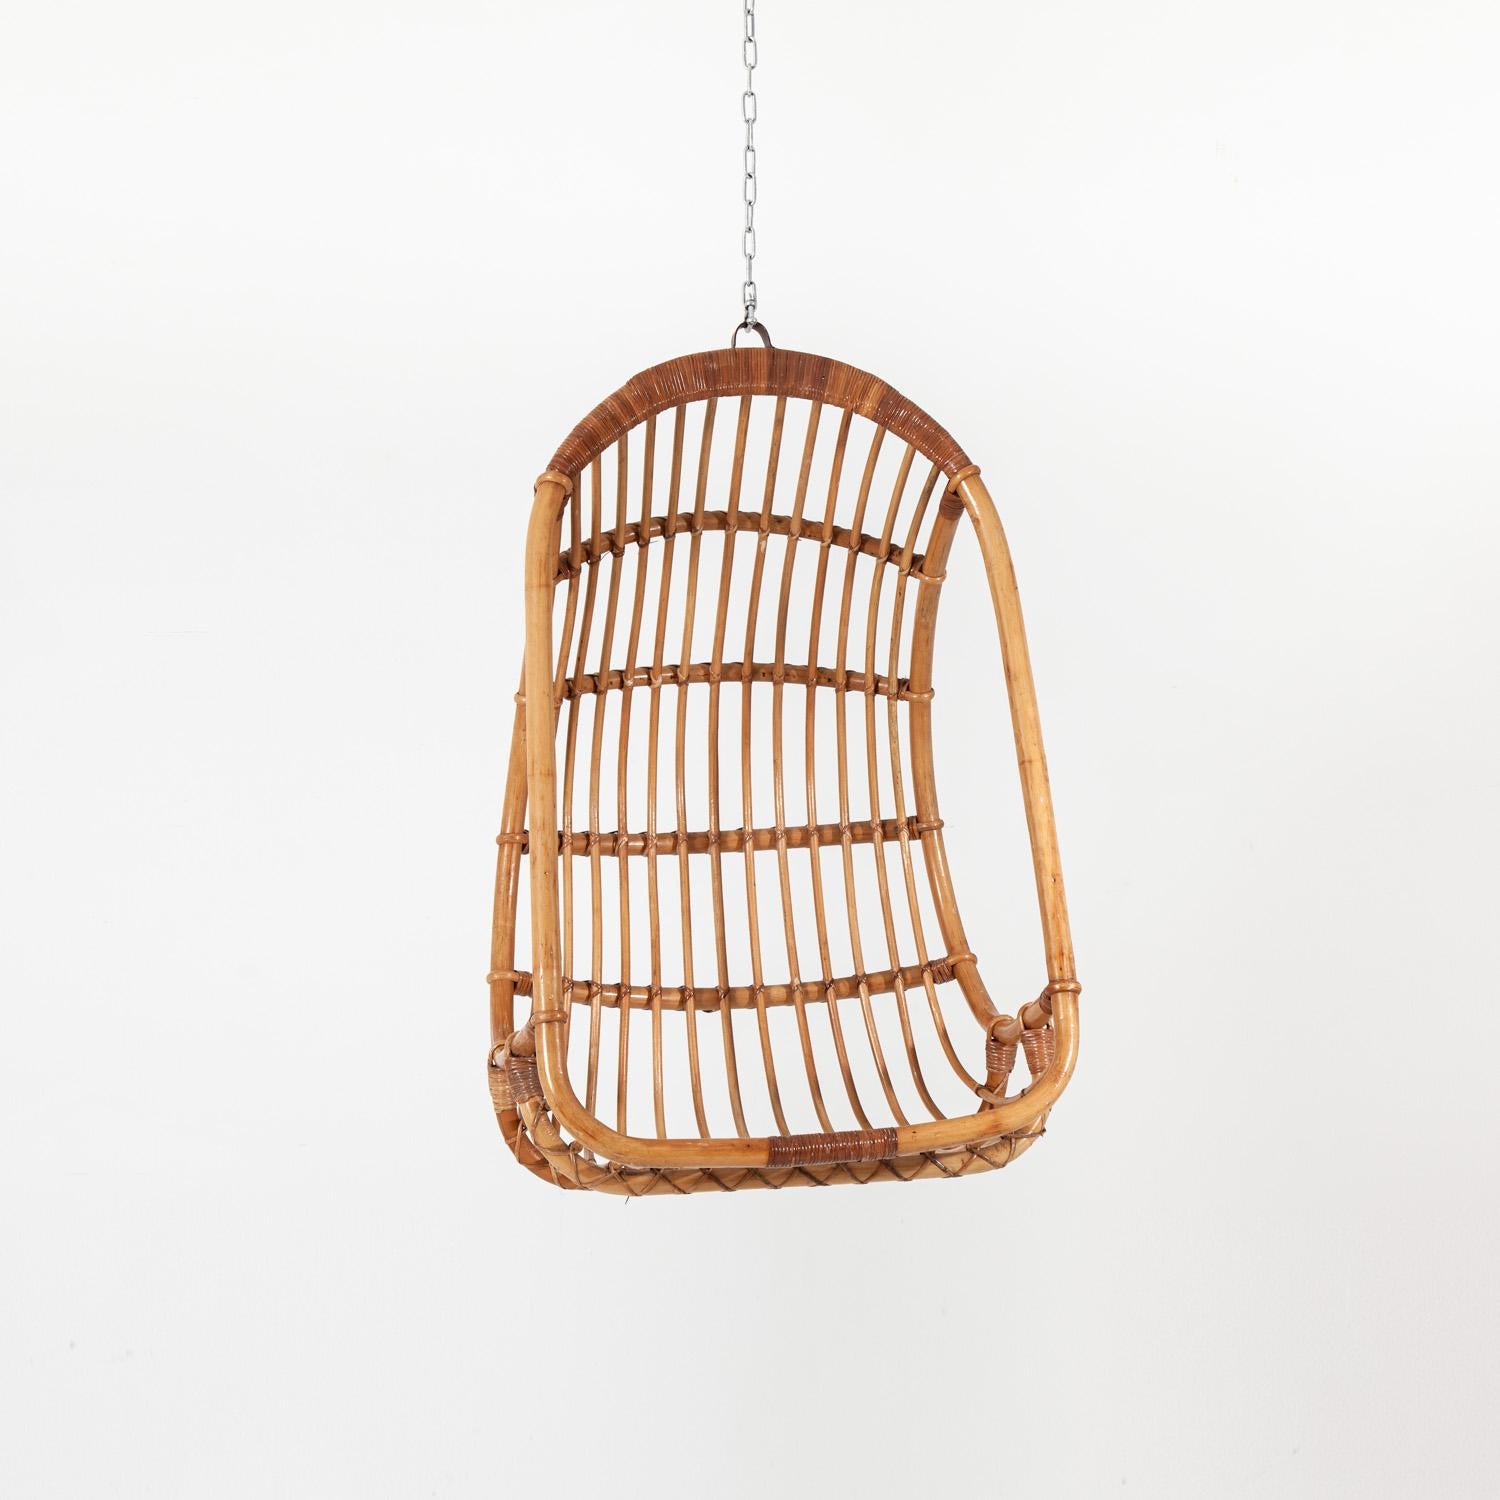 Mid-20th Century Cane Hanging Chair In Good Condition For Sale In York, GB